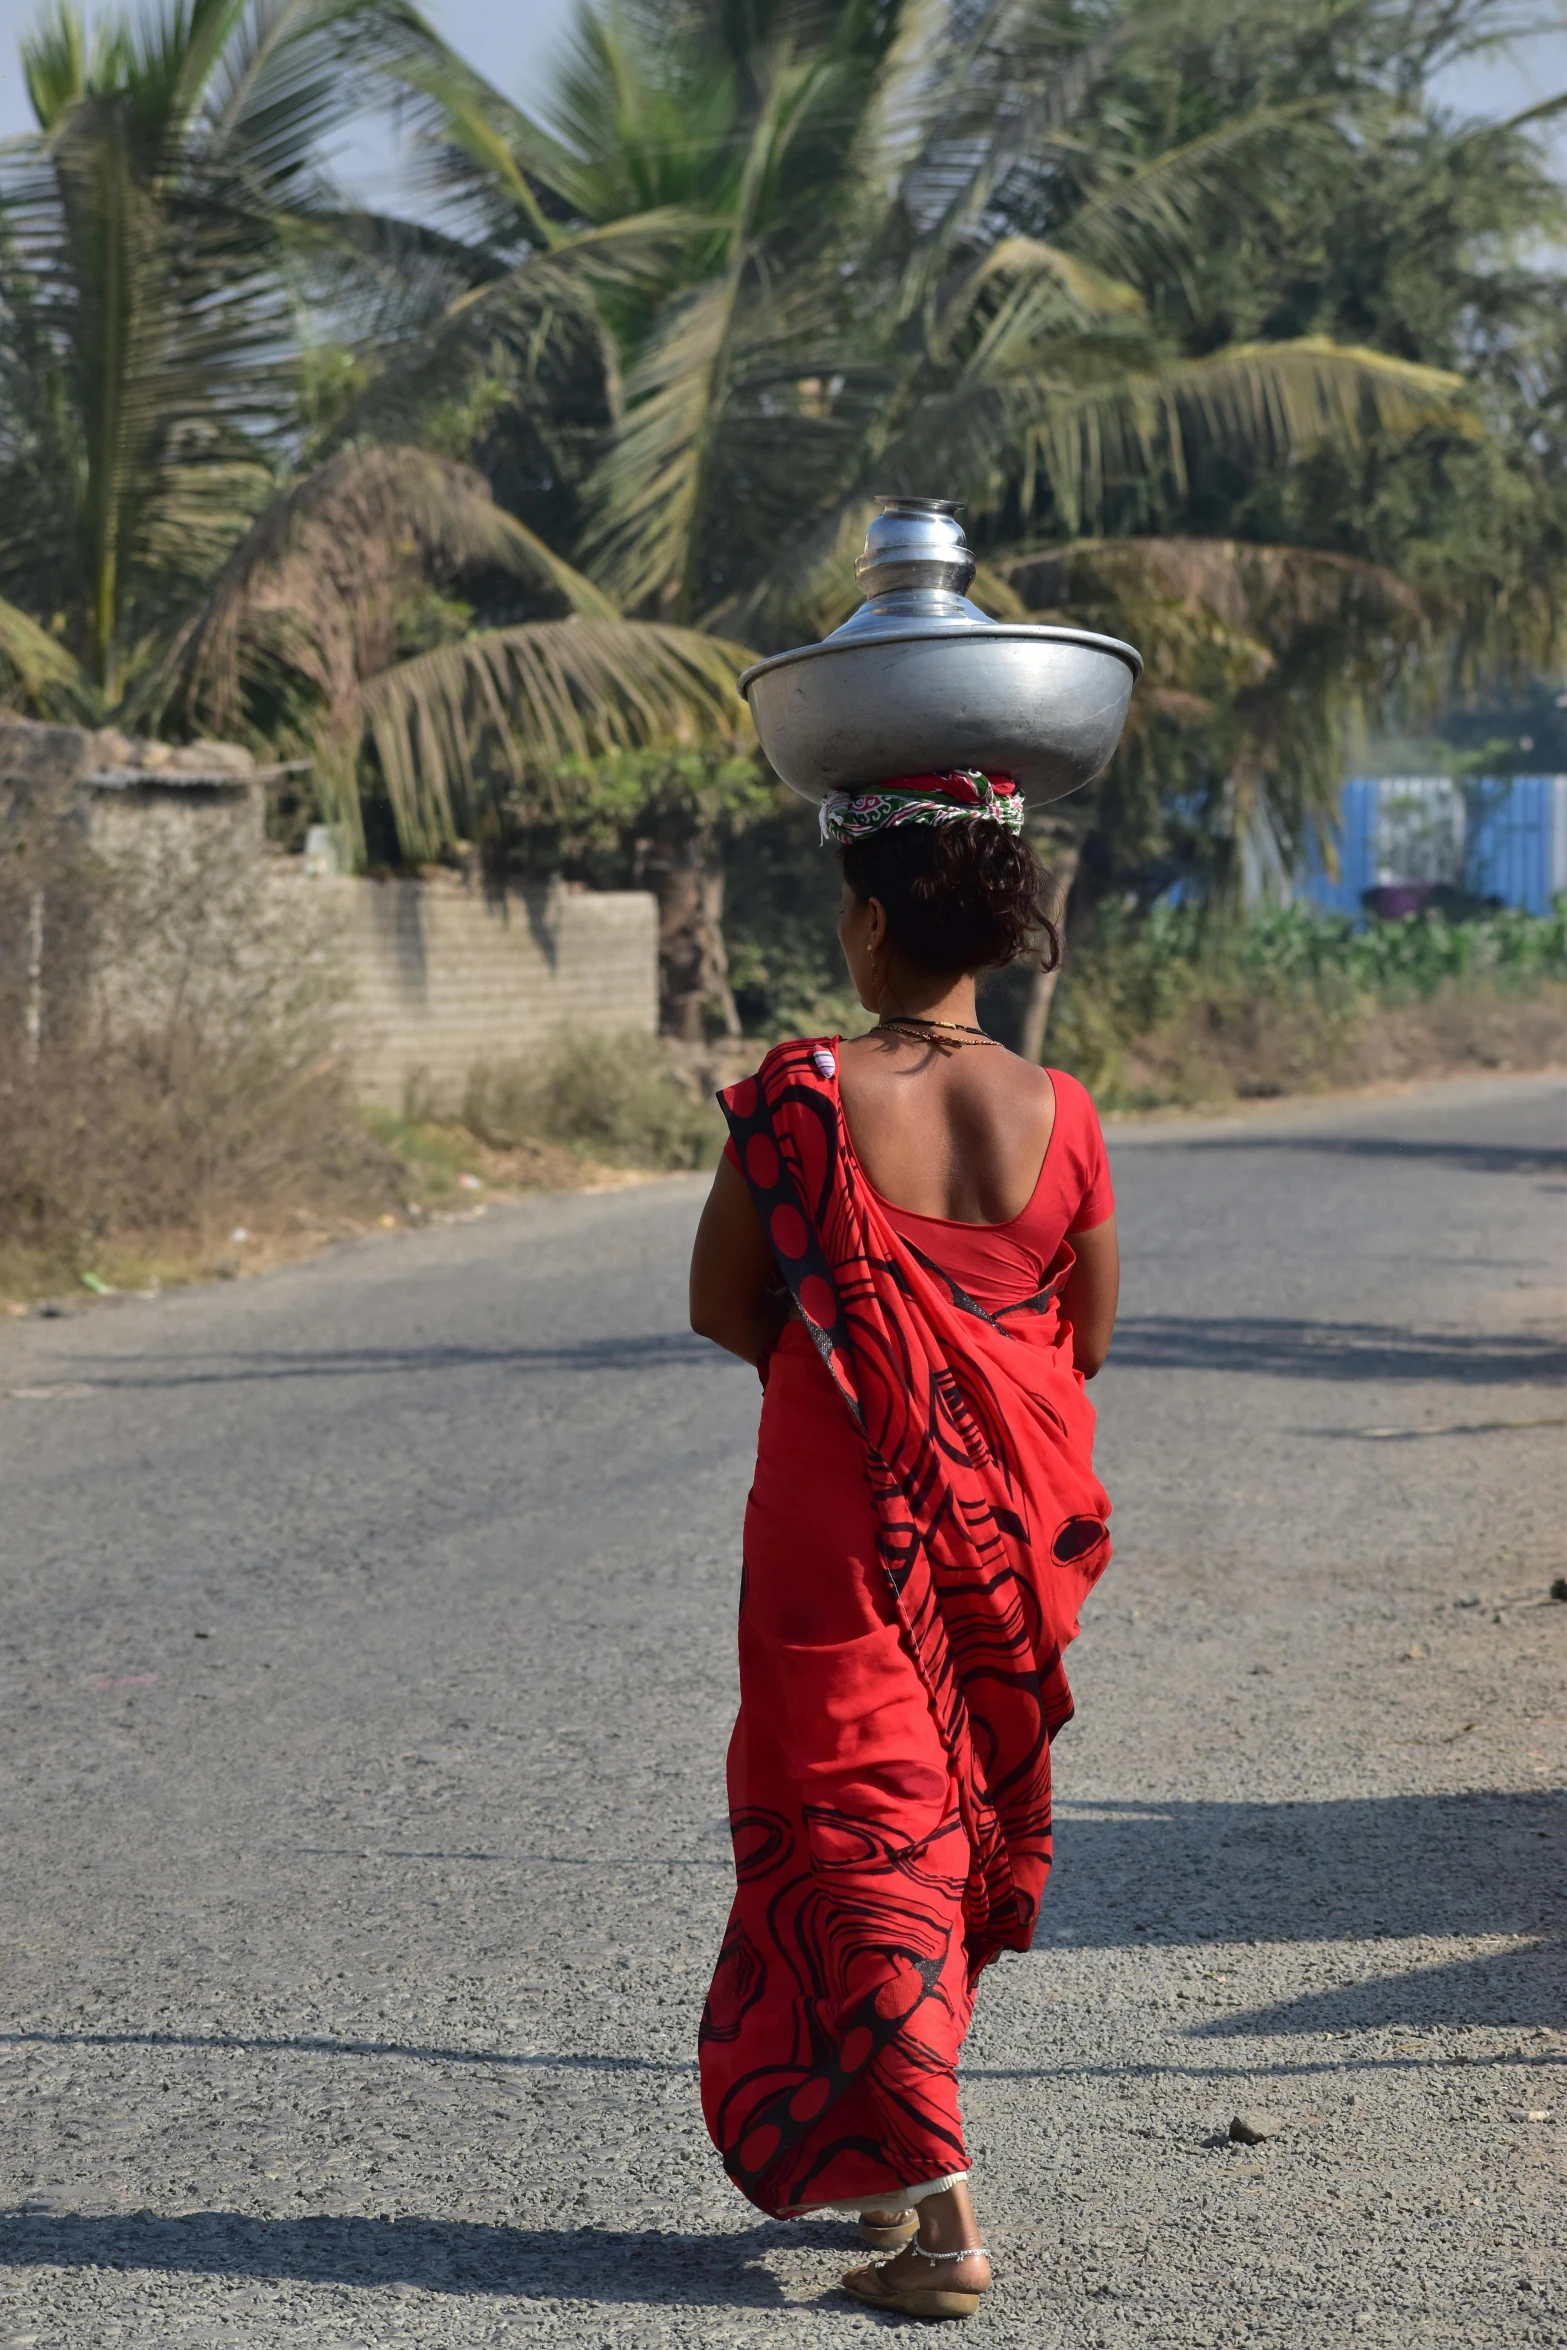 a woman walking down a street carrying a pot on her head, by Hannah Tompkins, samikshavad, water to waste, girl wears a red dress, in the countryside, update